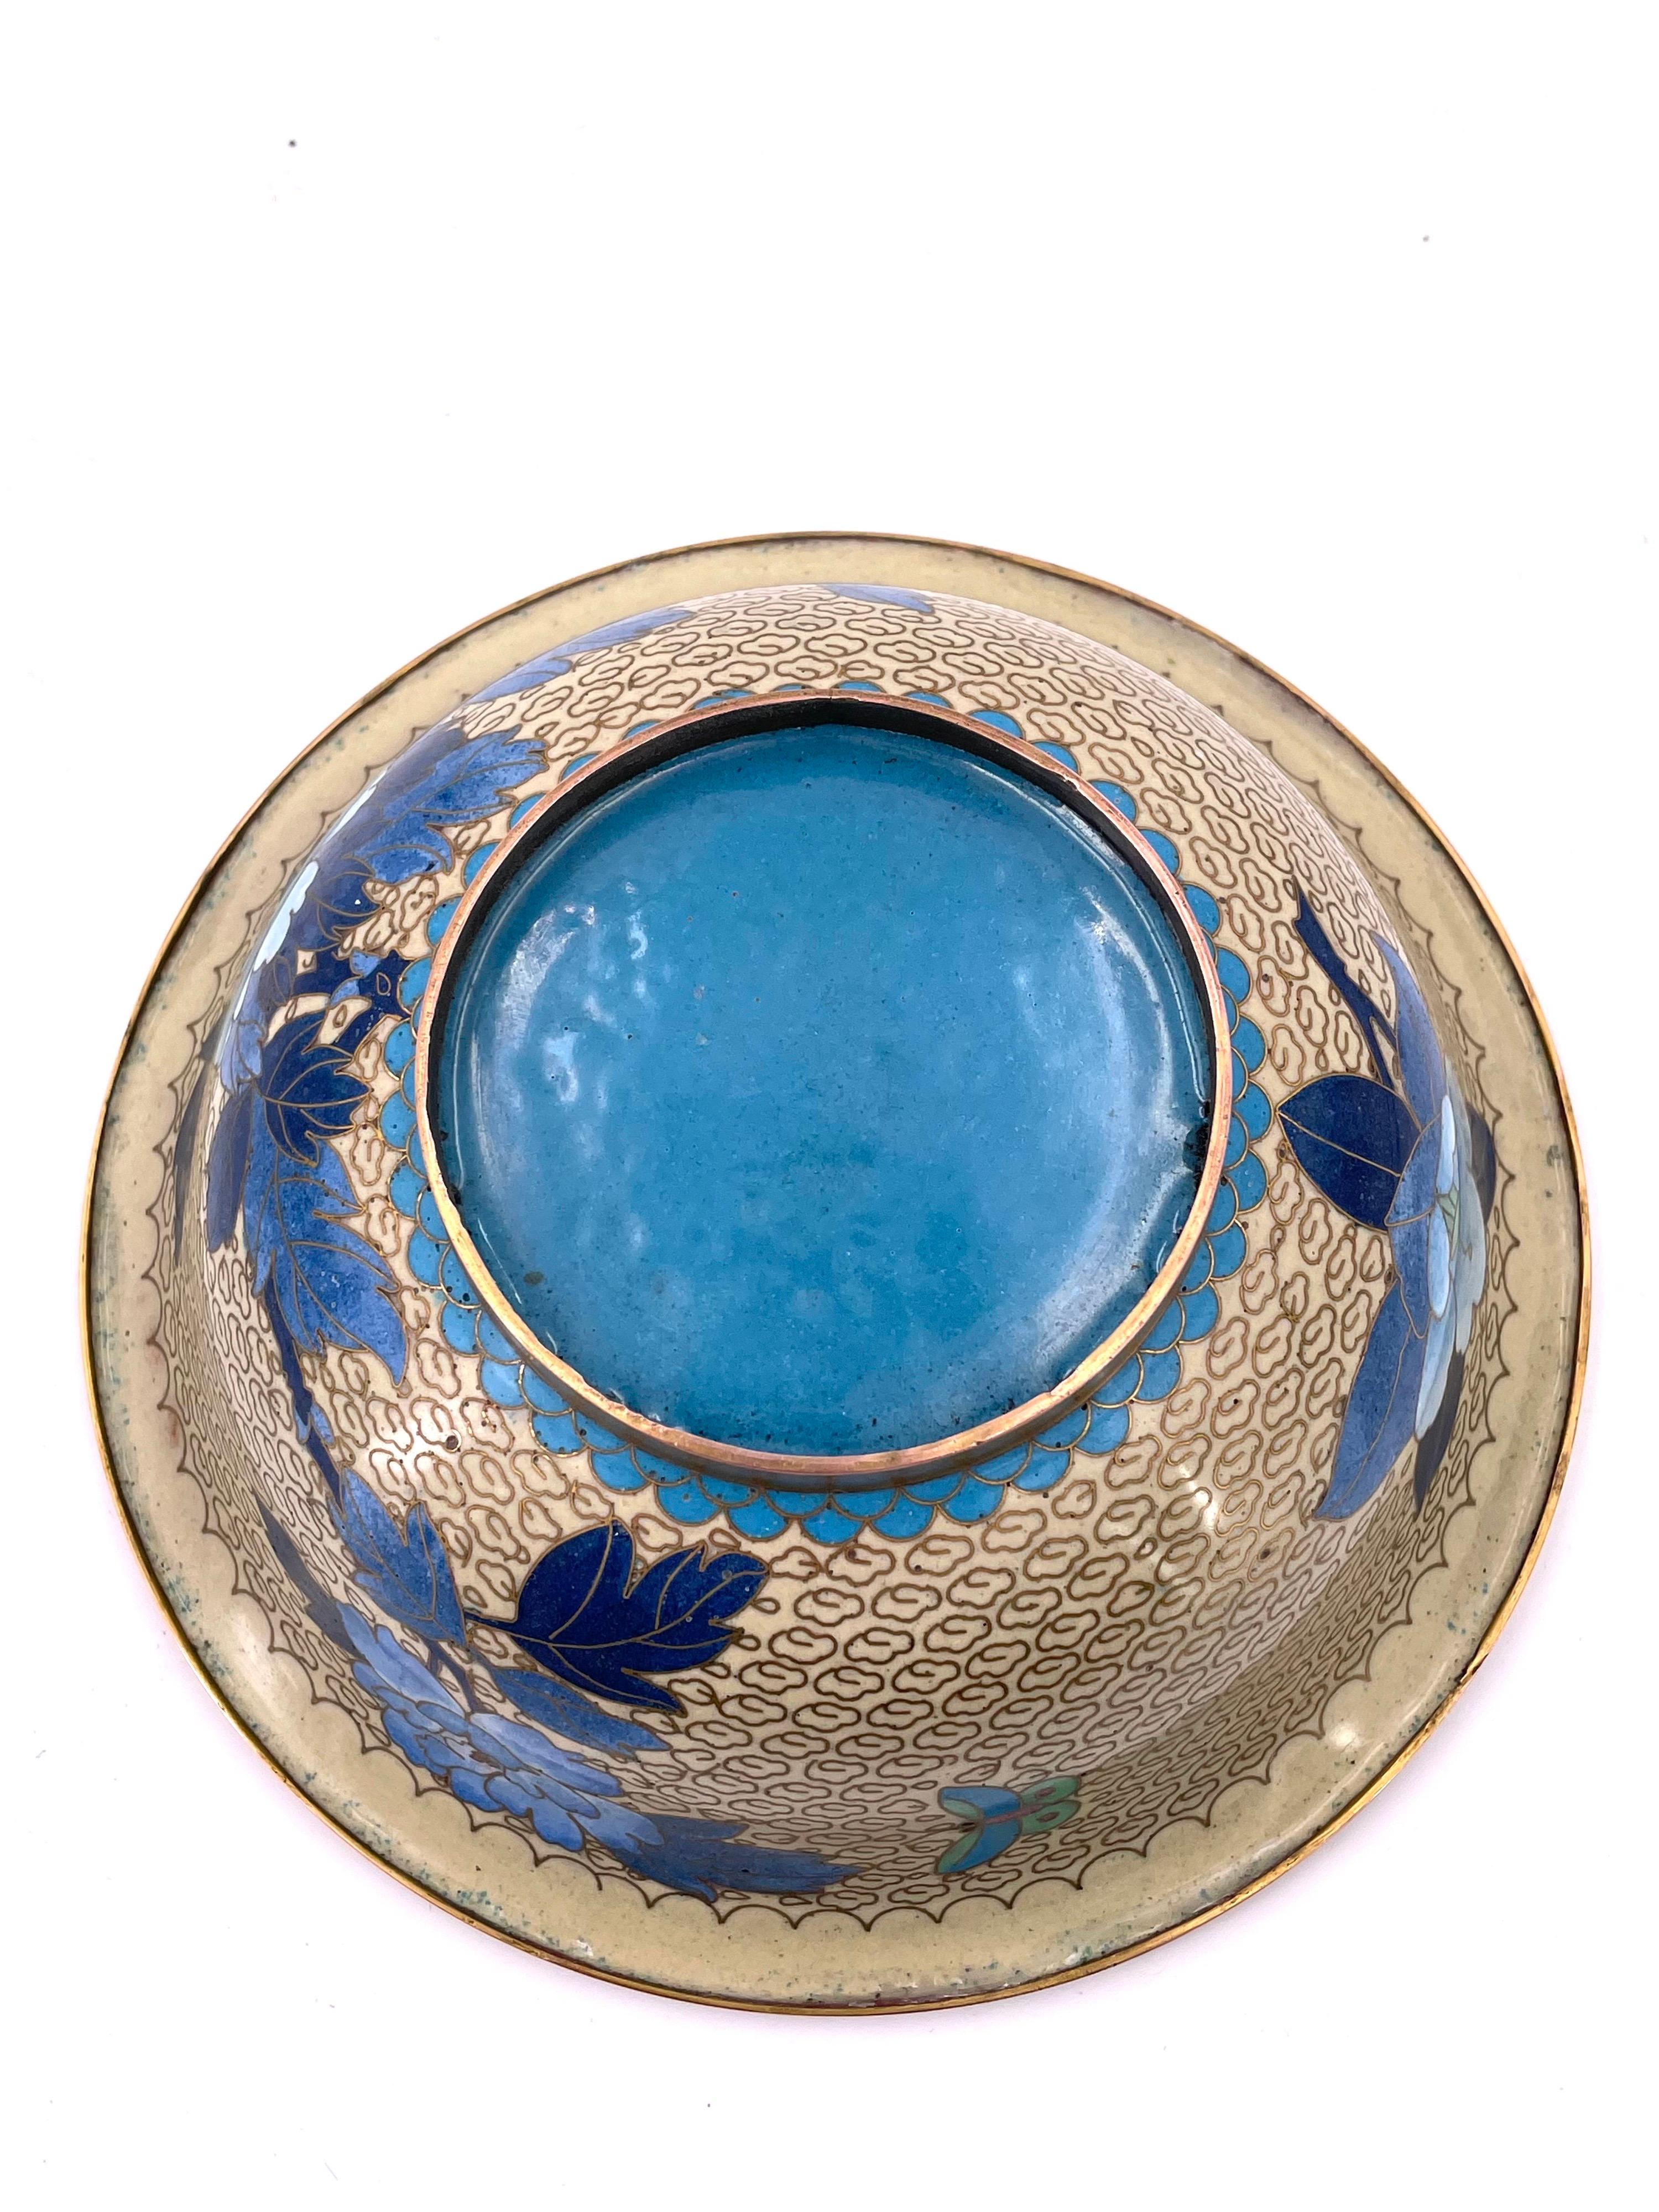 Cloissoné Chinese Cloisonné Footed Bowl with Floral Butterfly Pattern